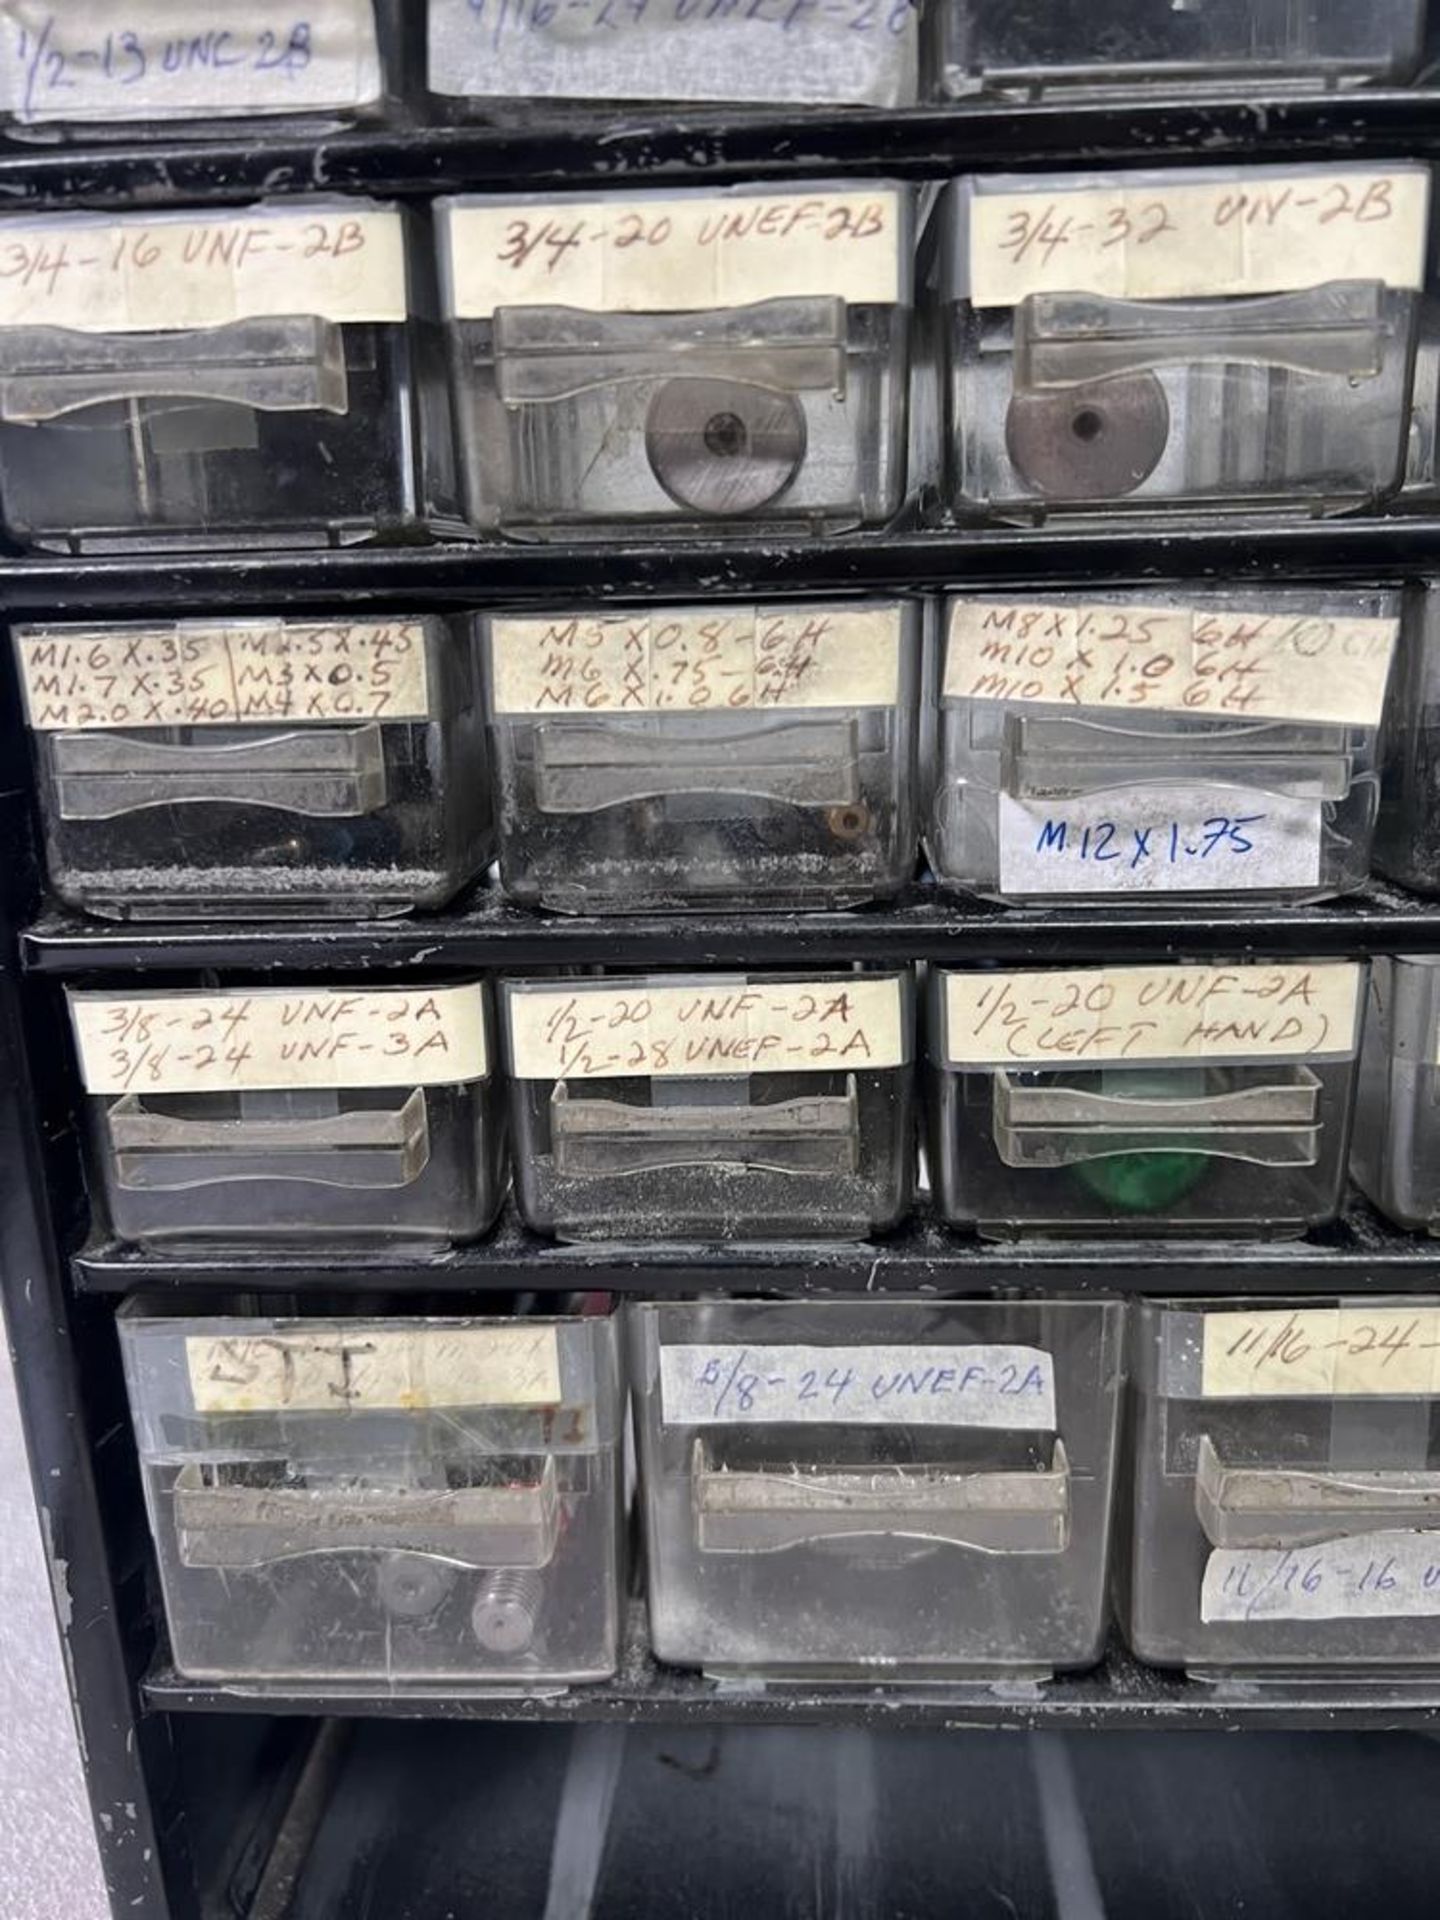 50 Station Organizer Full of Thread Gages Labeled Various Sizes - Image 6 of 13